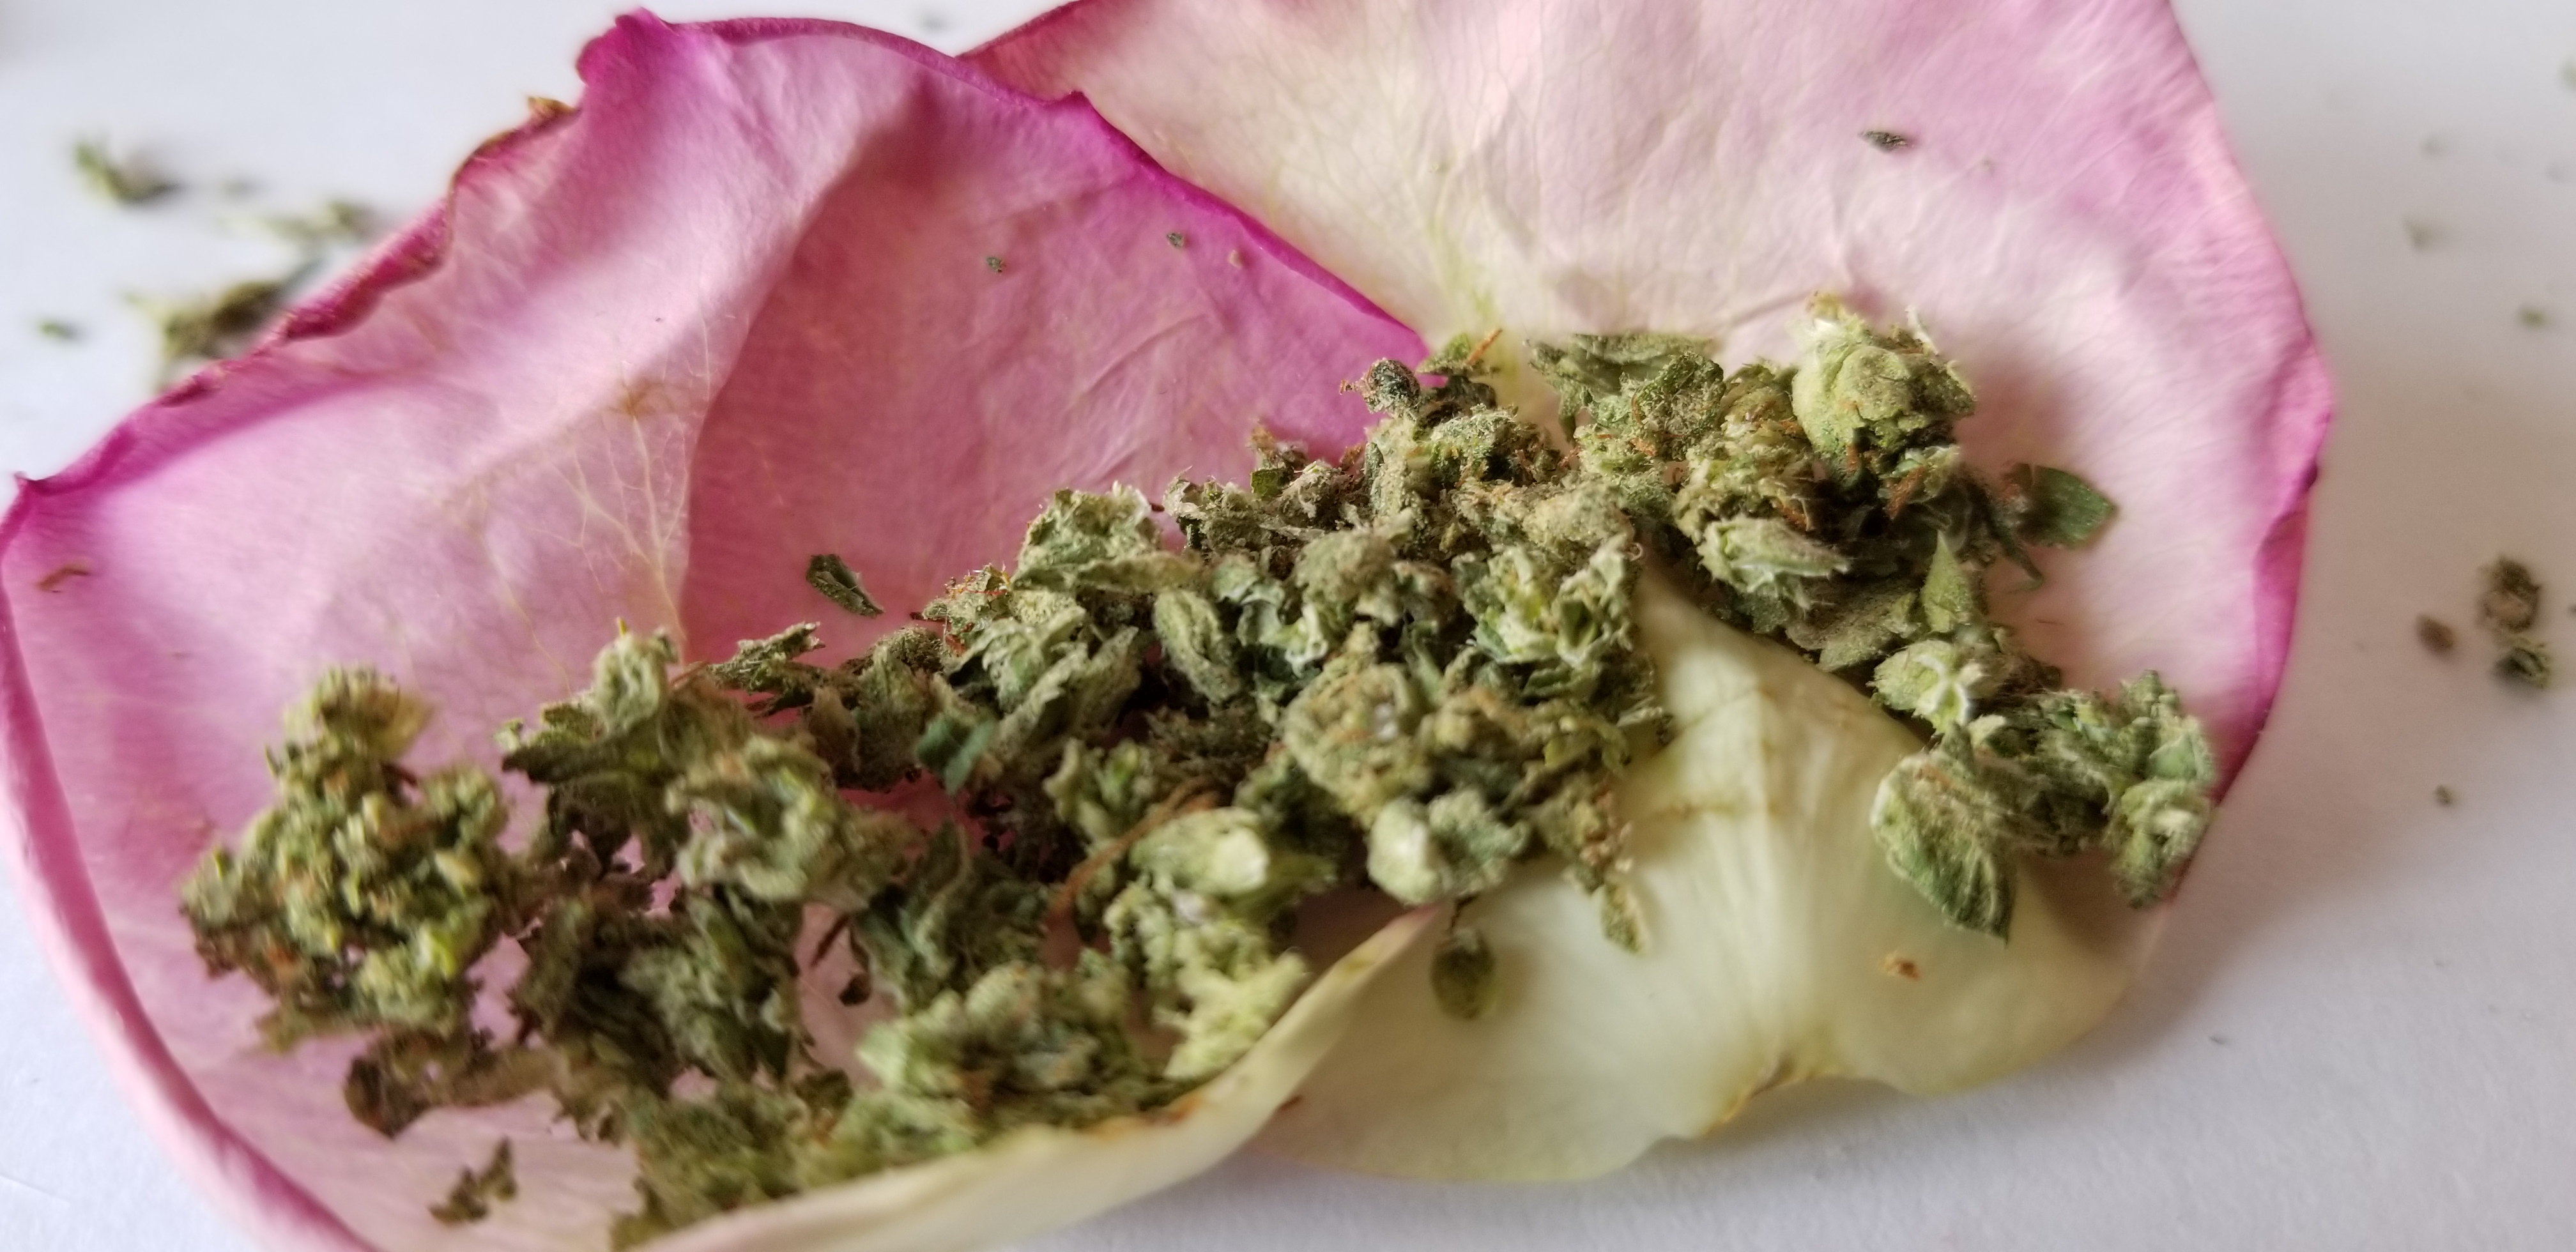 Art of Rolling a Rose Blunt: Add A Floral Twist to Your Smoking